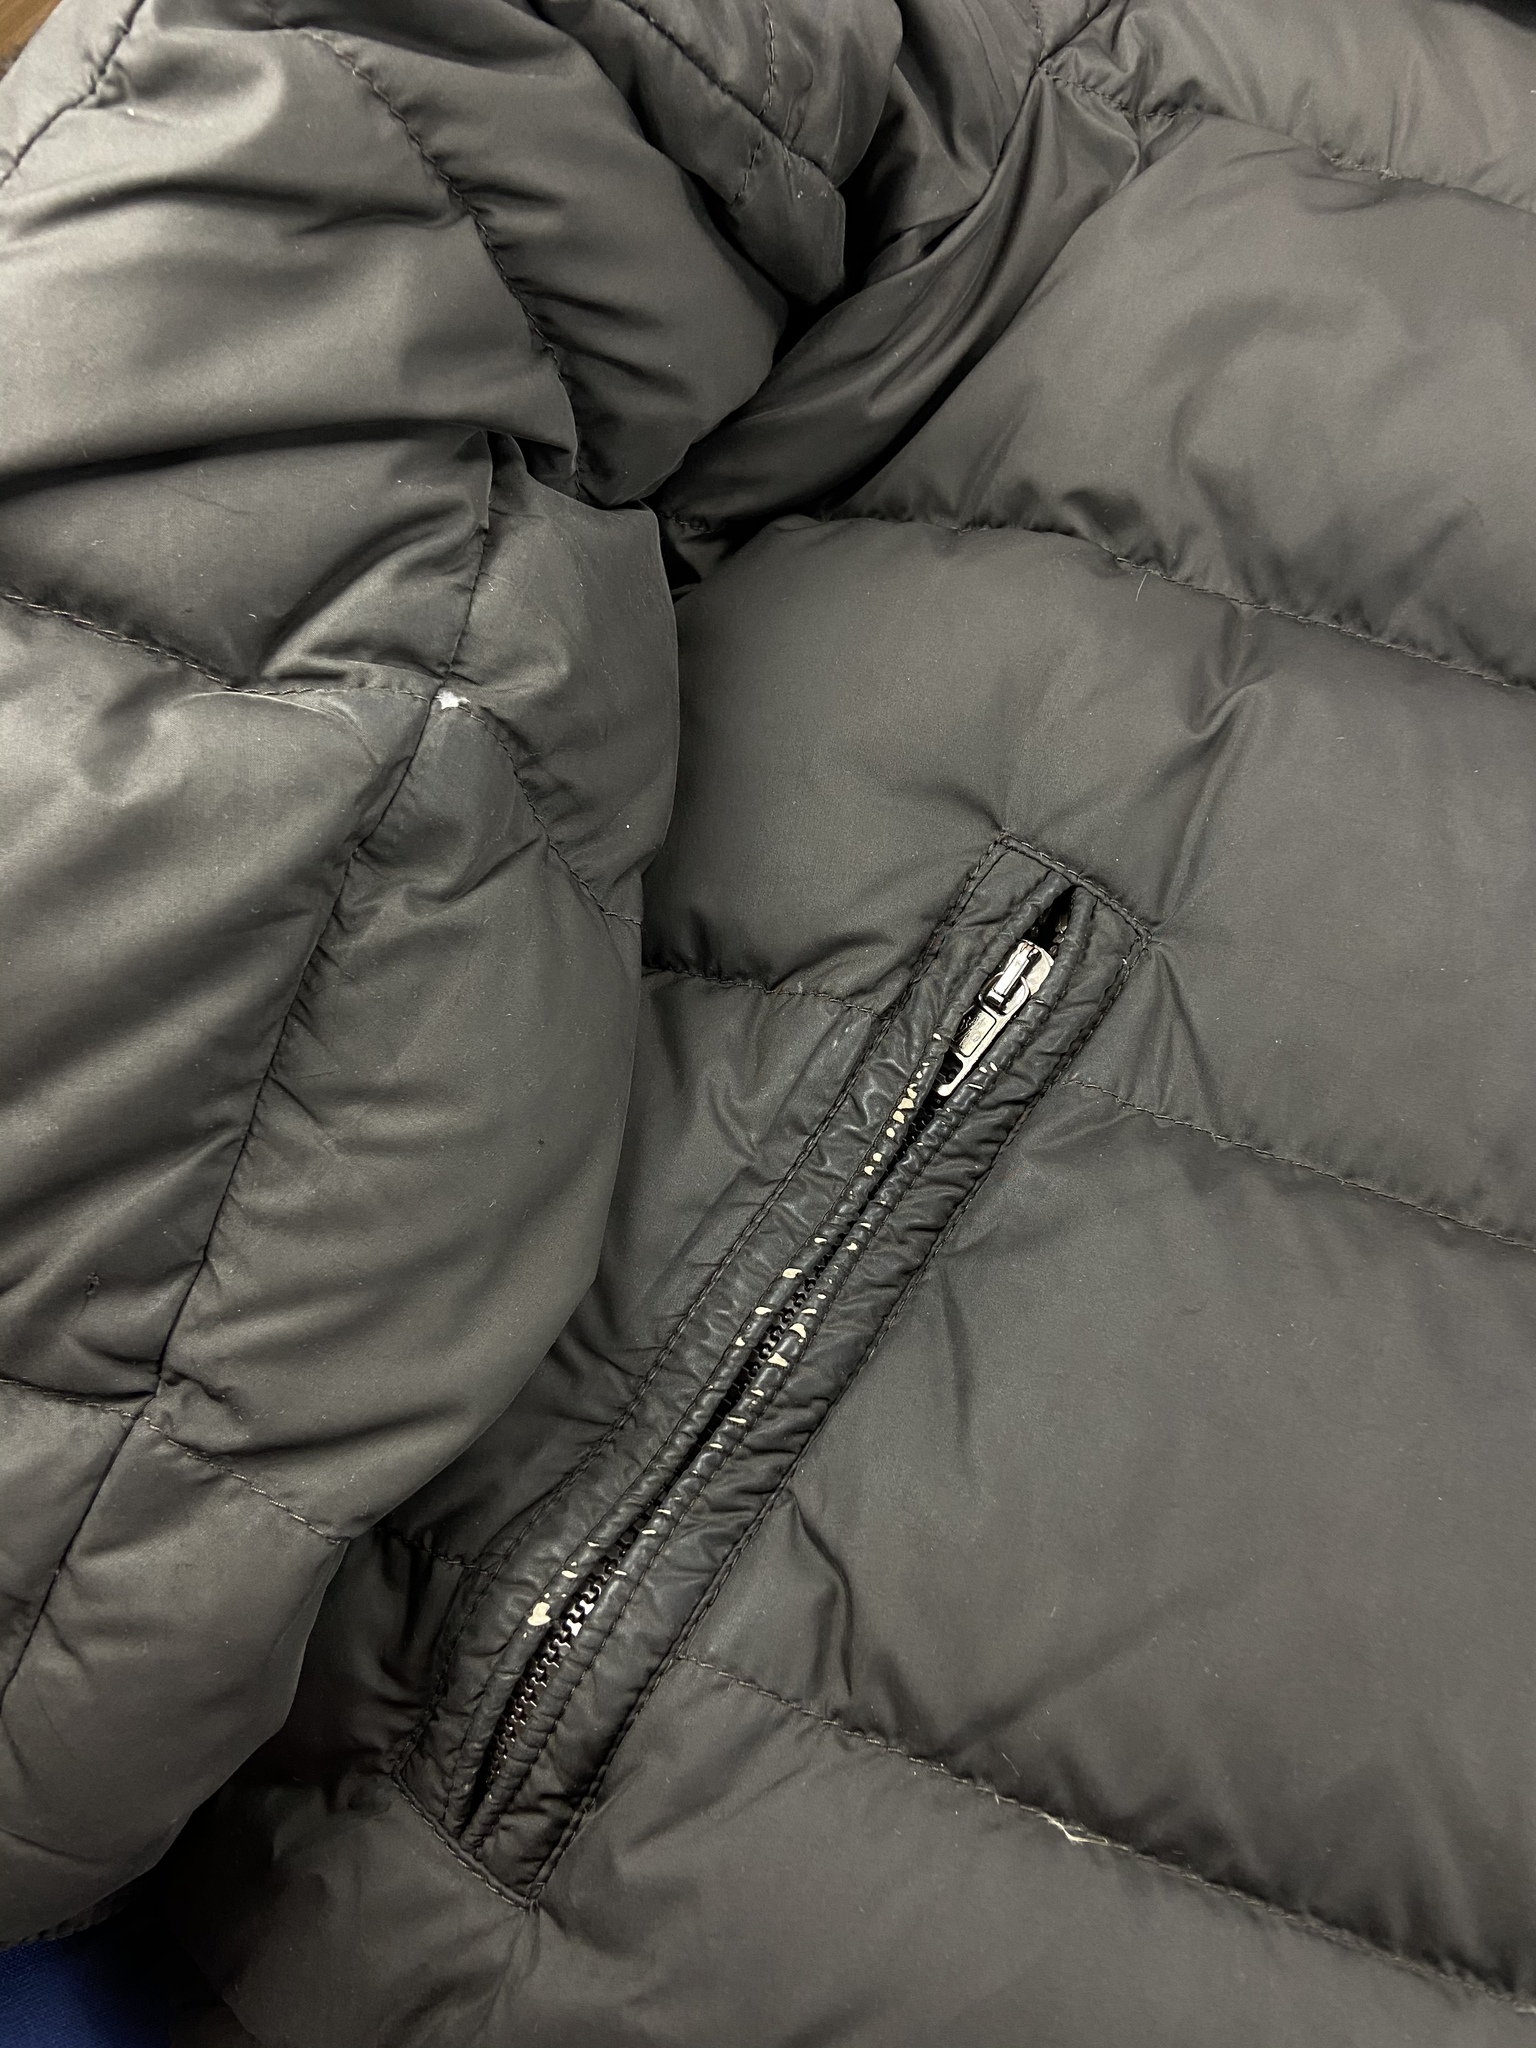 Moncler Chevalier Down Jacket